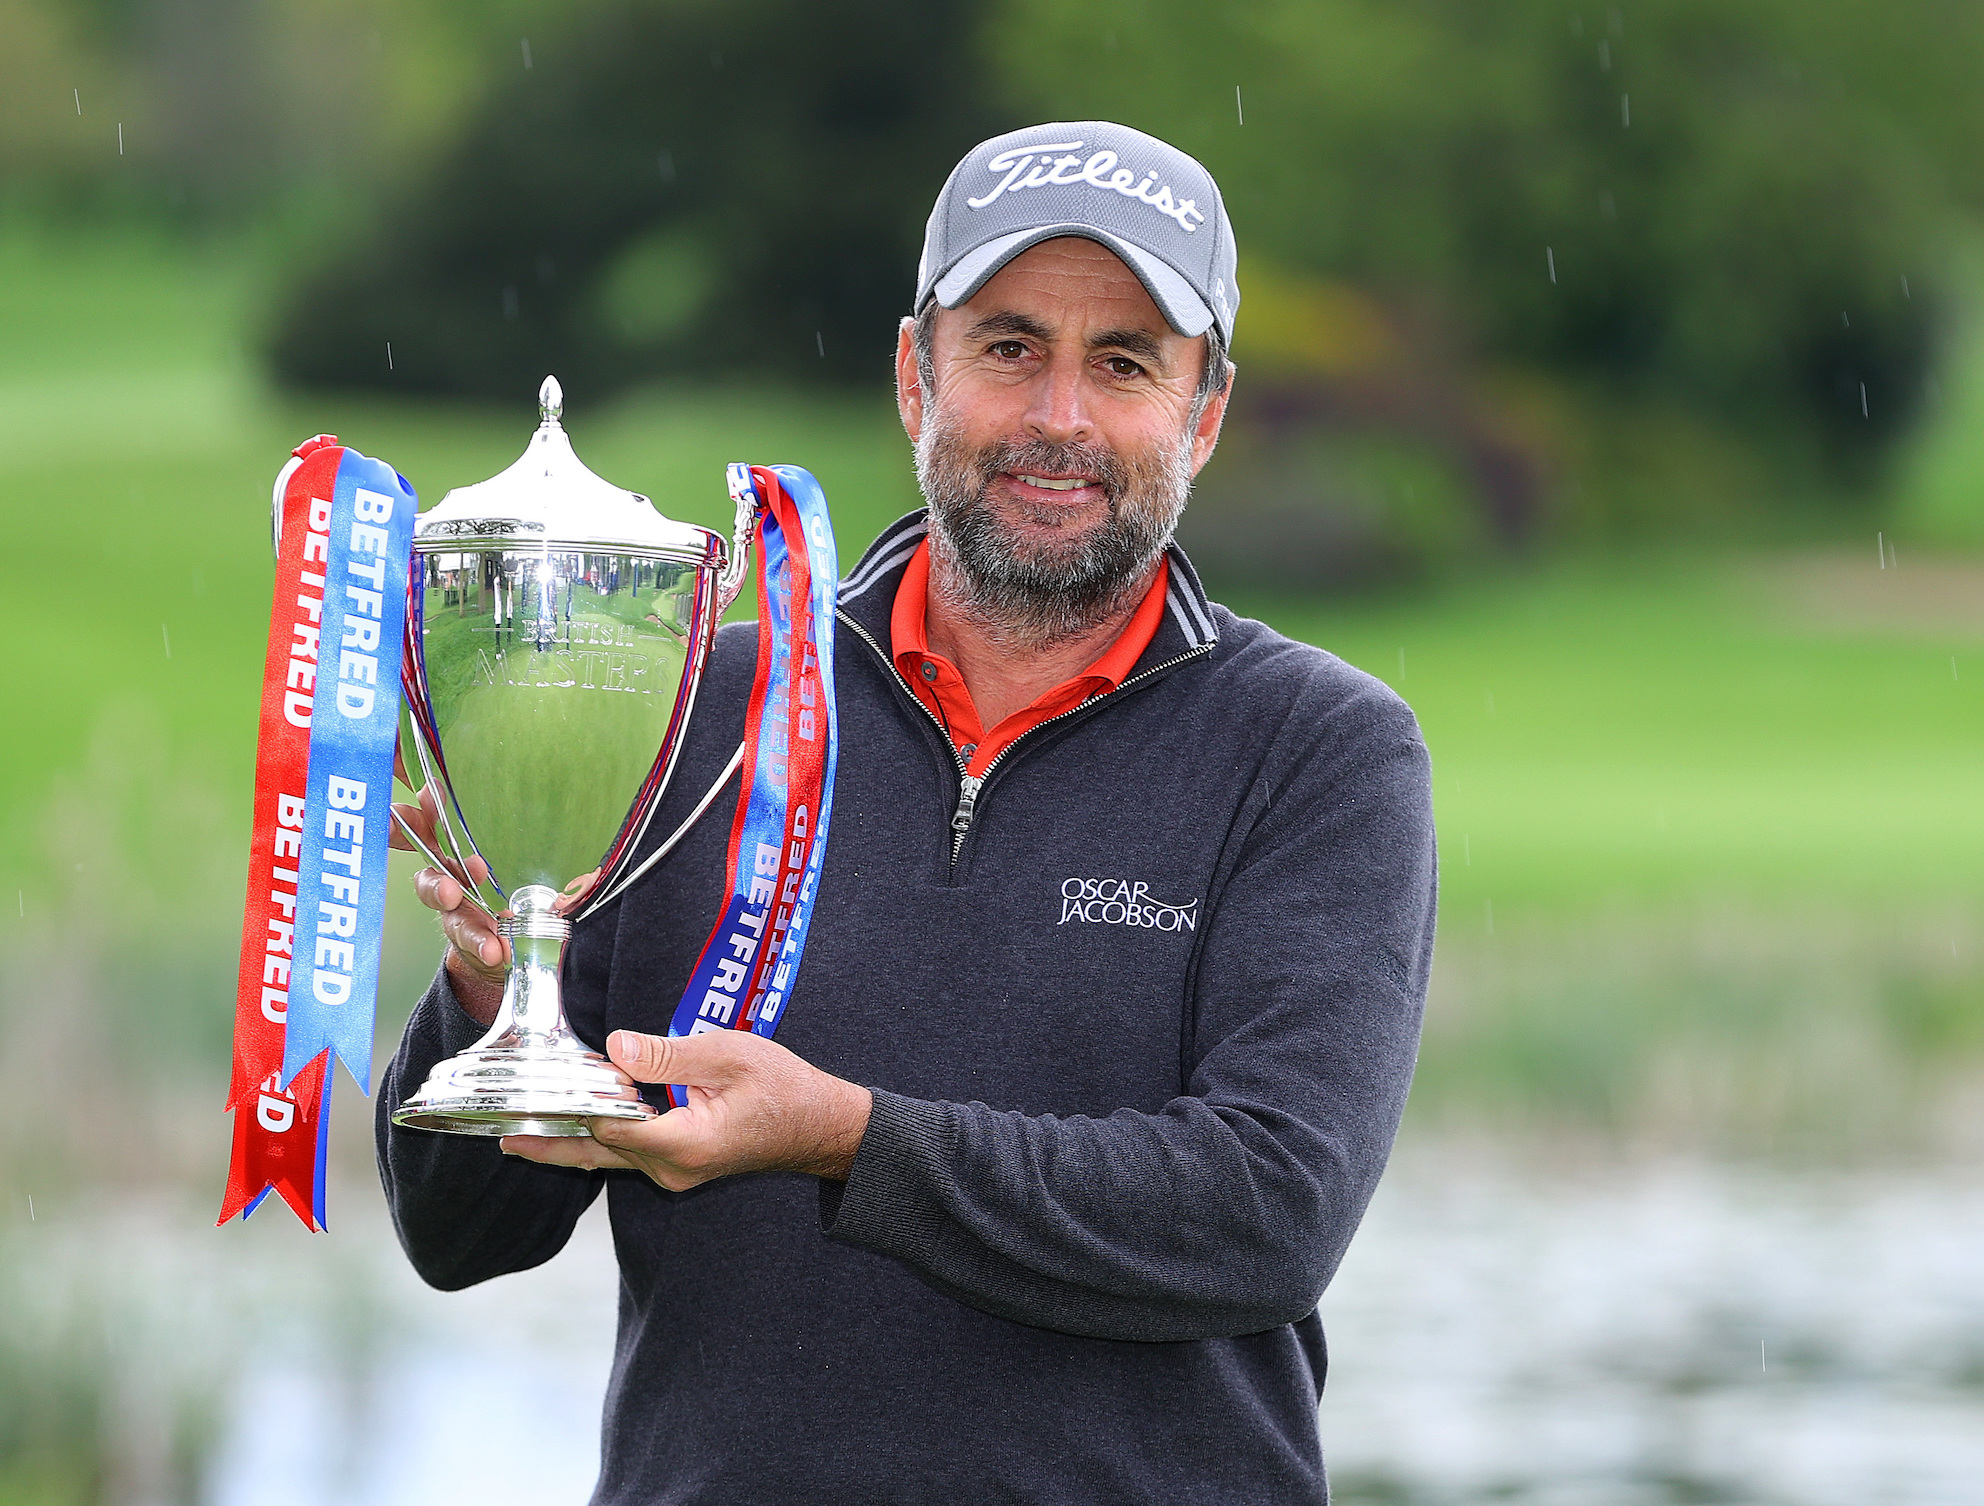 Betfred British Masters hosted by Danny Willett – Day Four